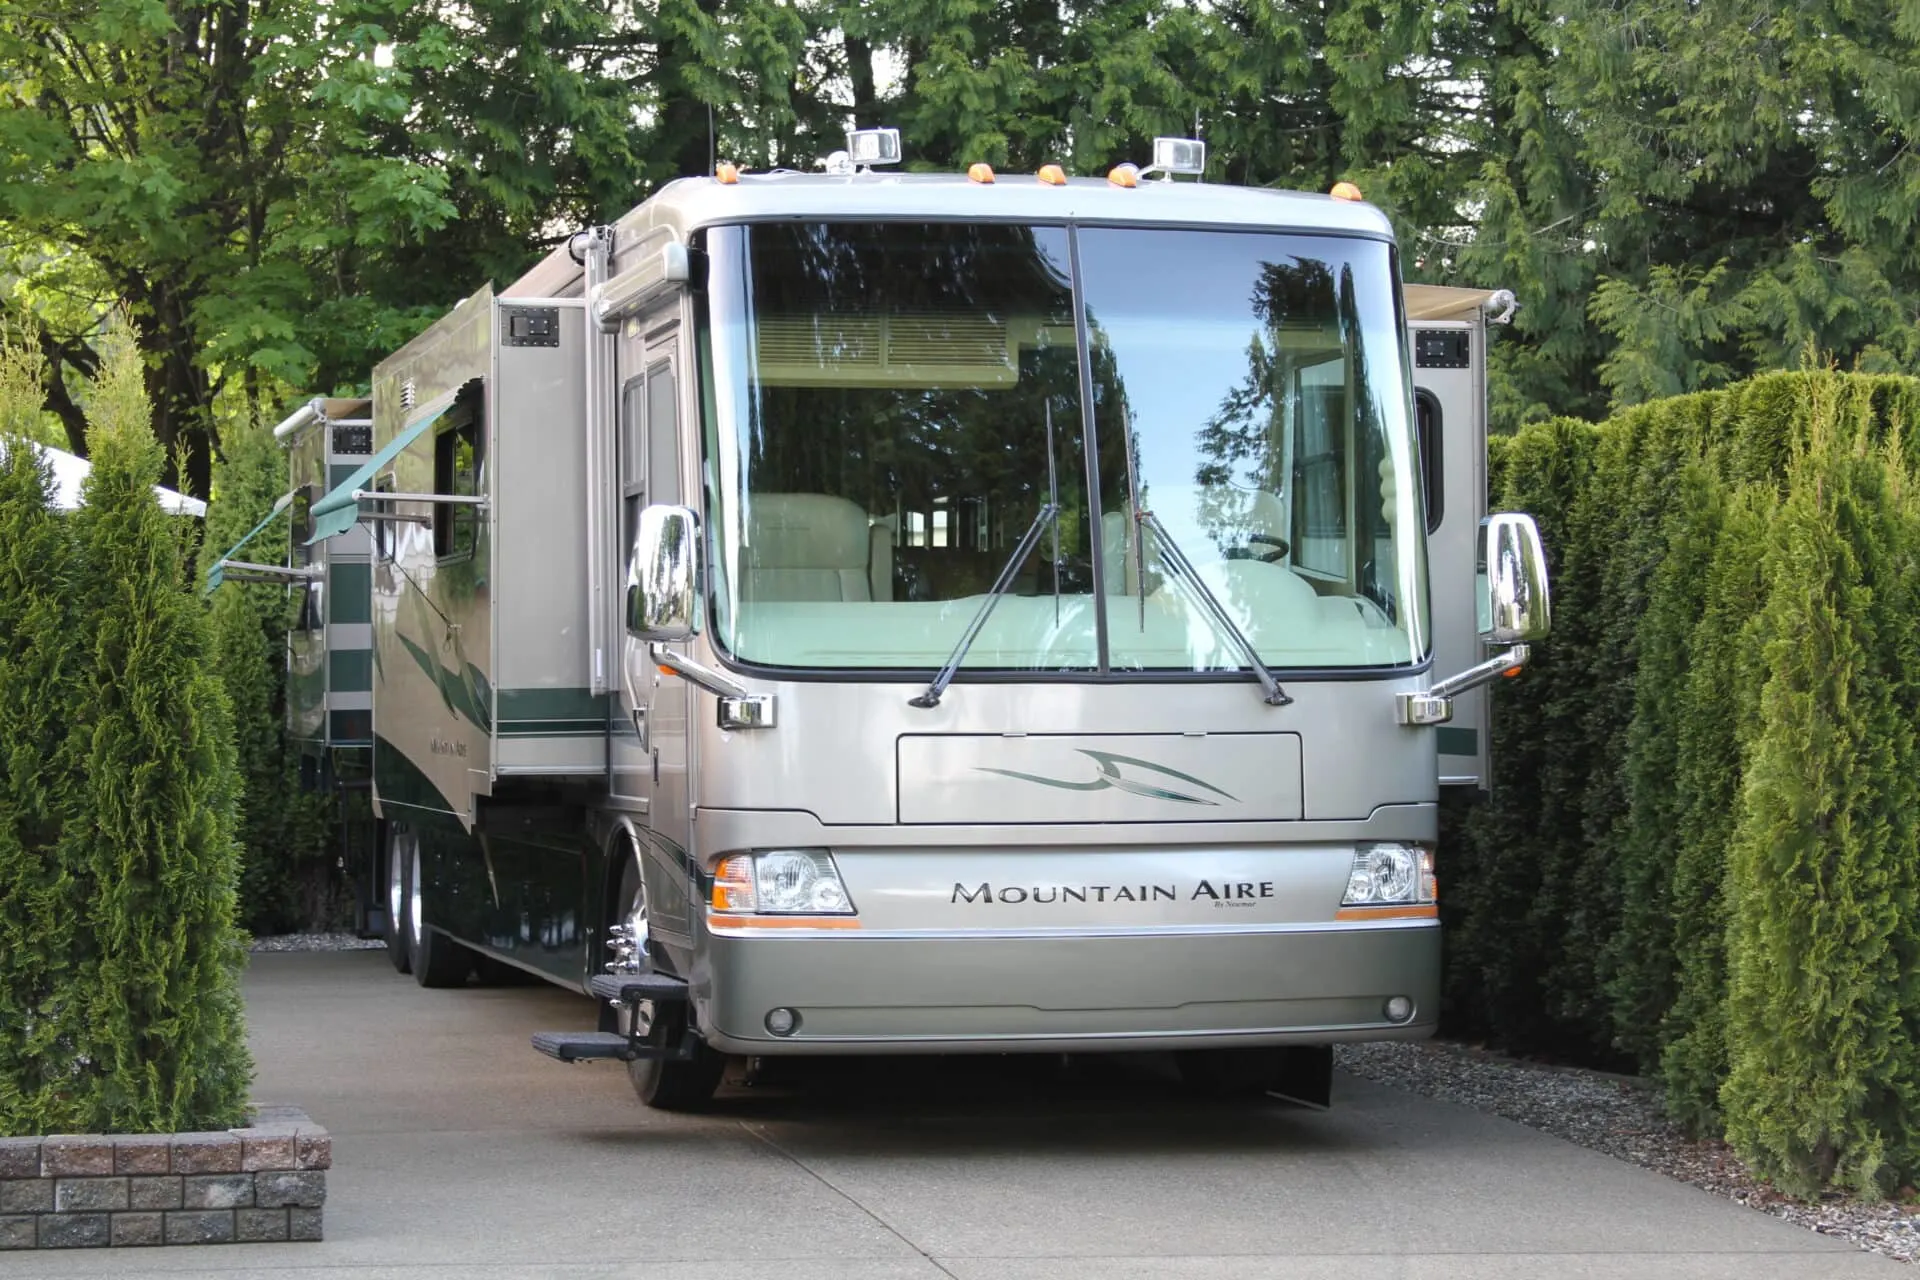 Motorhome insurance cost is highest for Class A diesel pushers